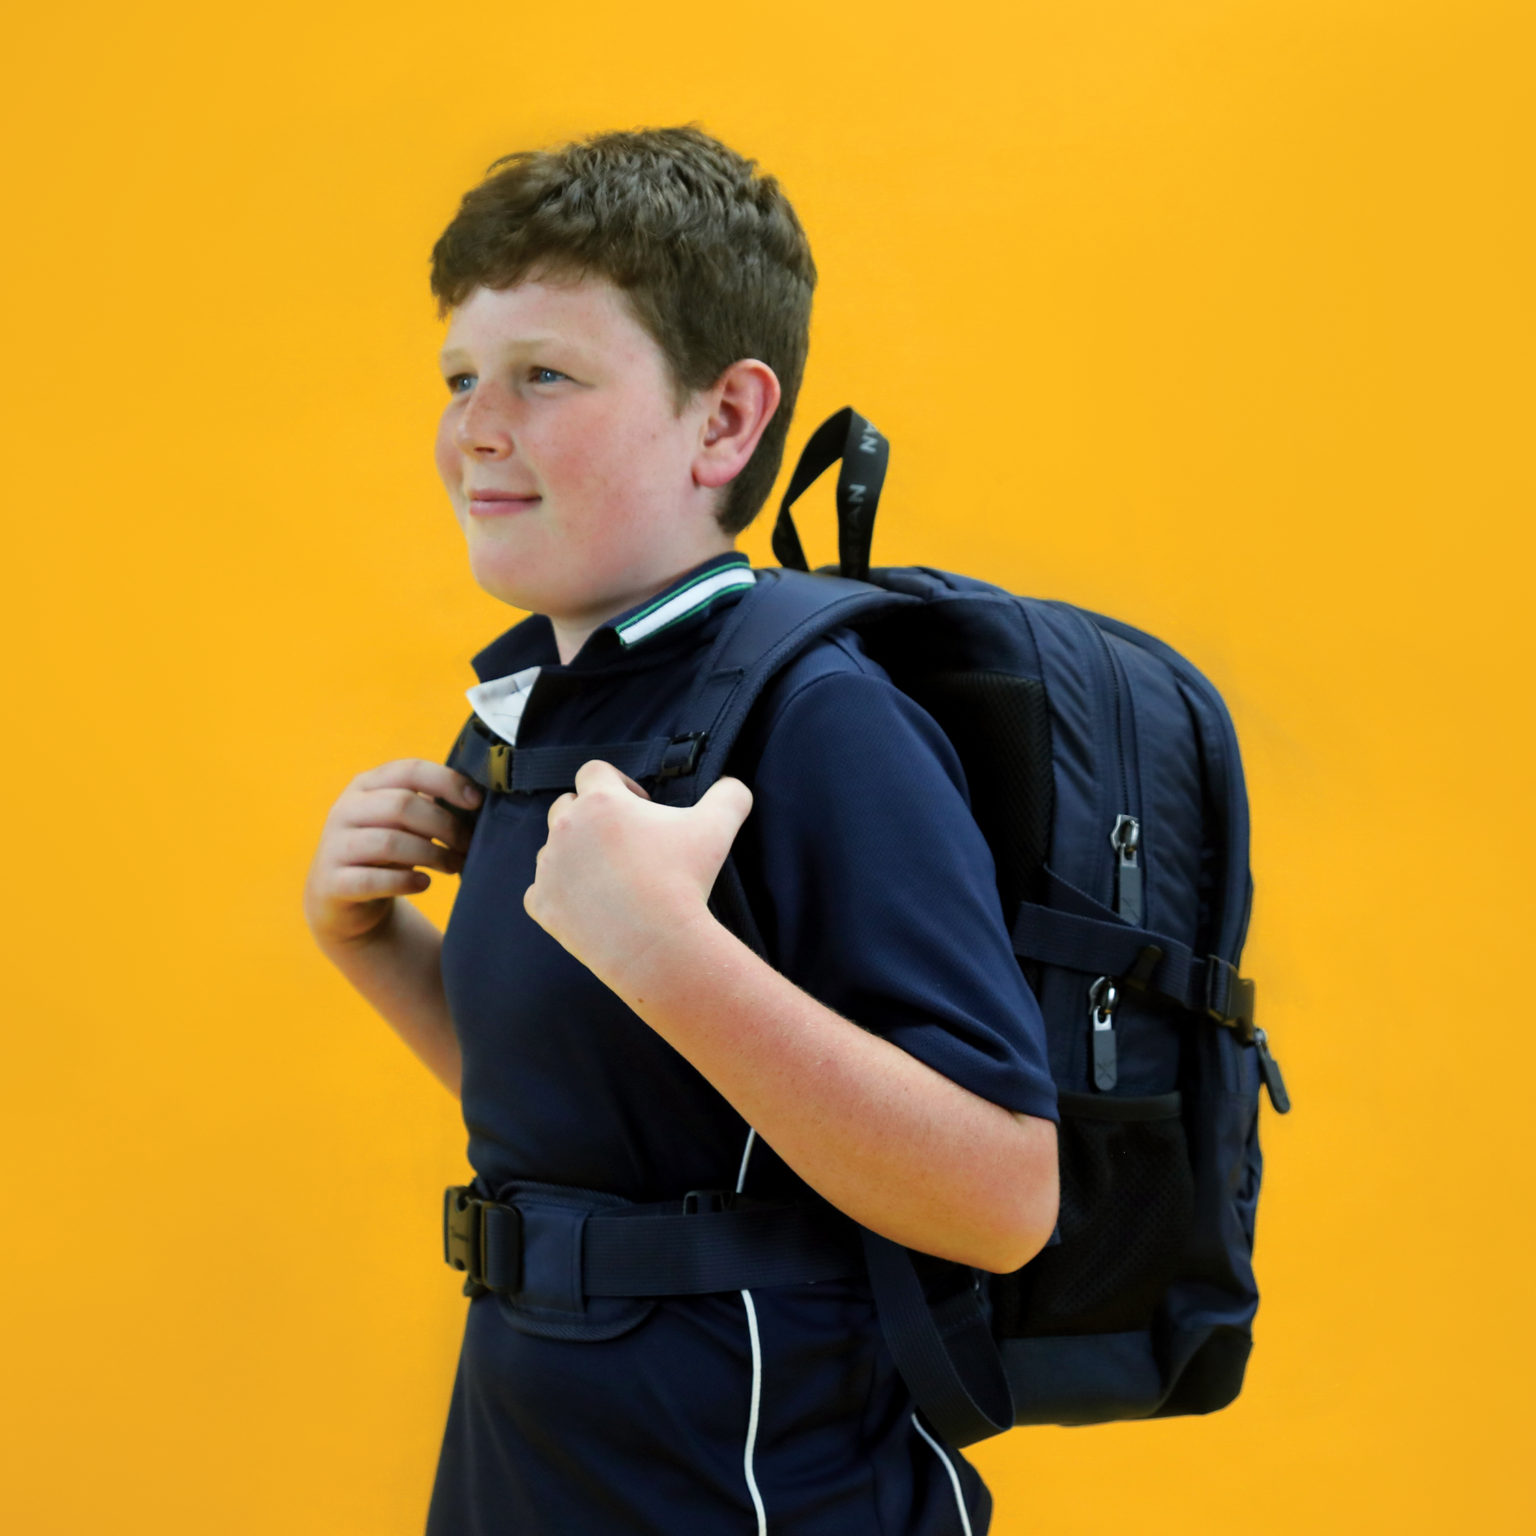 Child with Back pack